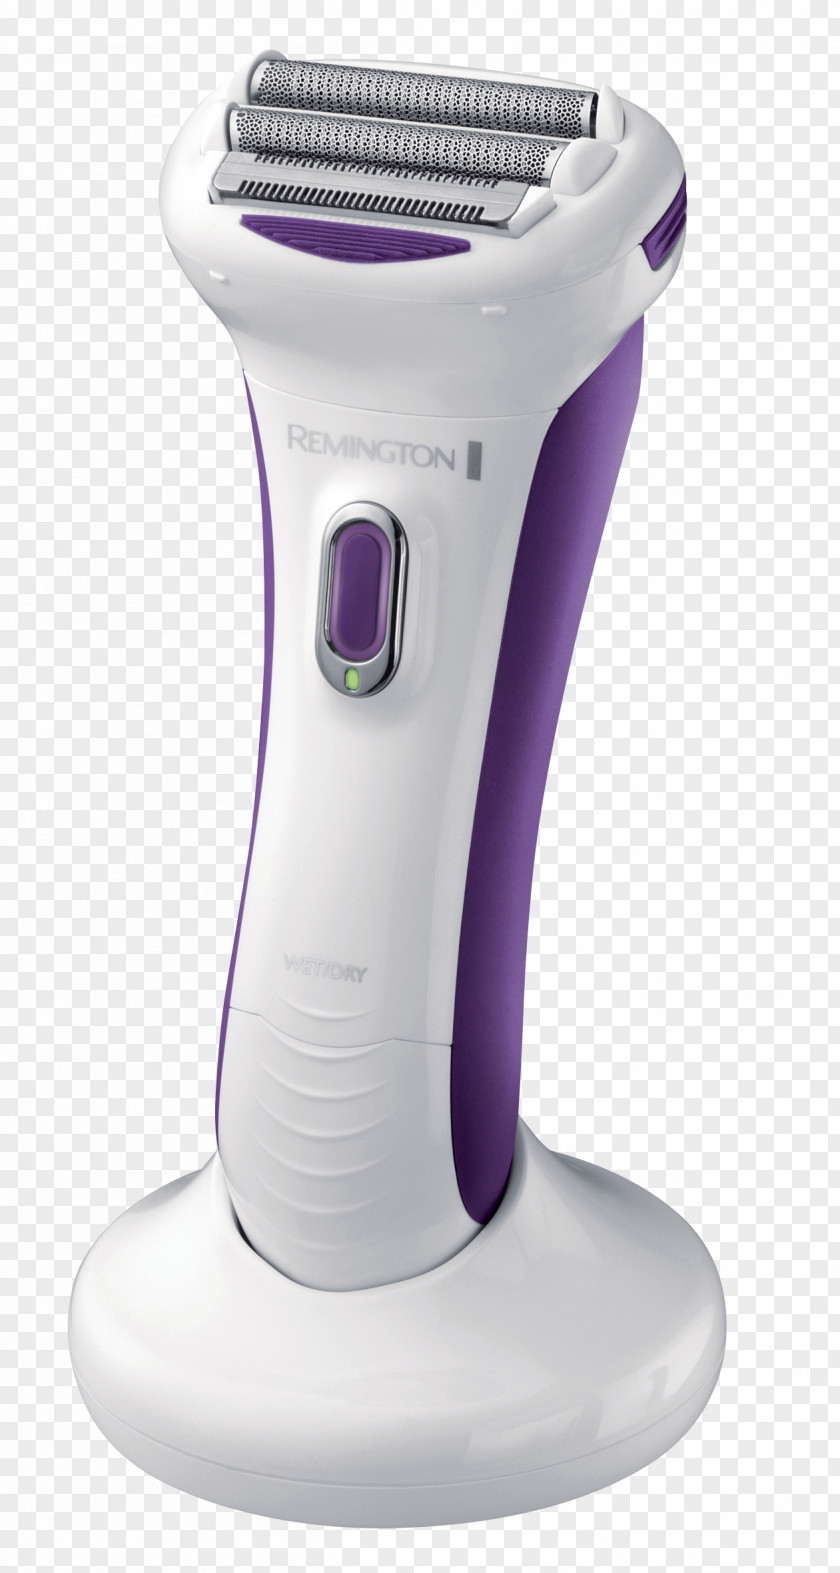 Razor Electric Razors & Hair Trimmers Ladyshave Remington Smooth Silky WDF5030 Shaving WDF4840 PNG